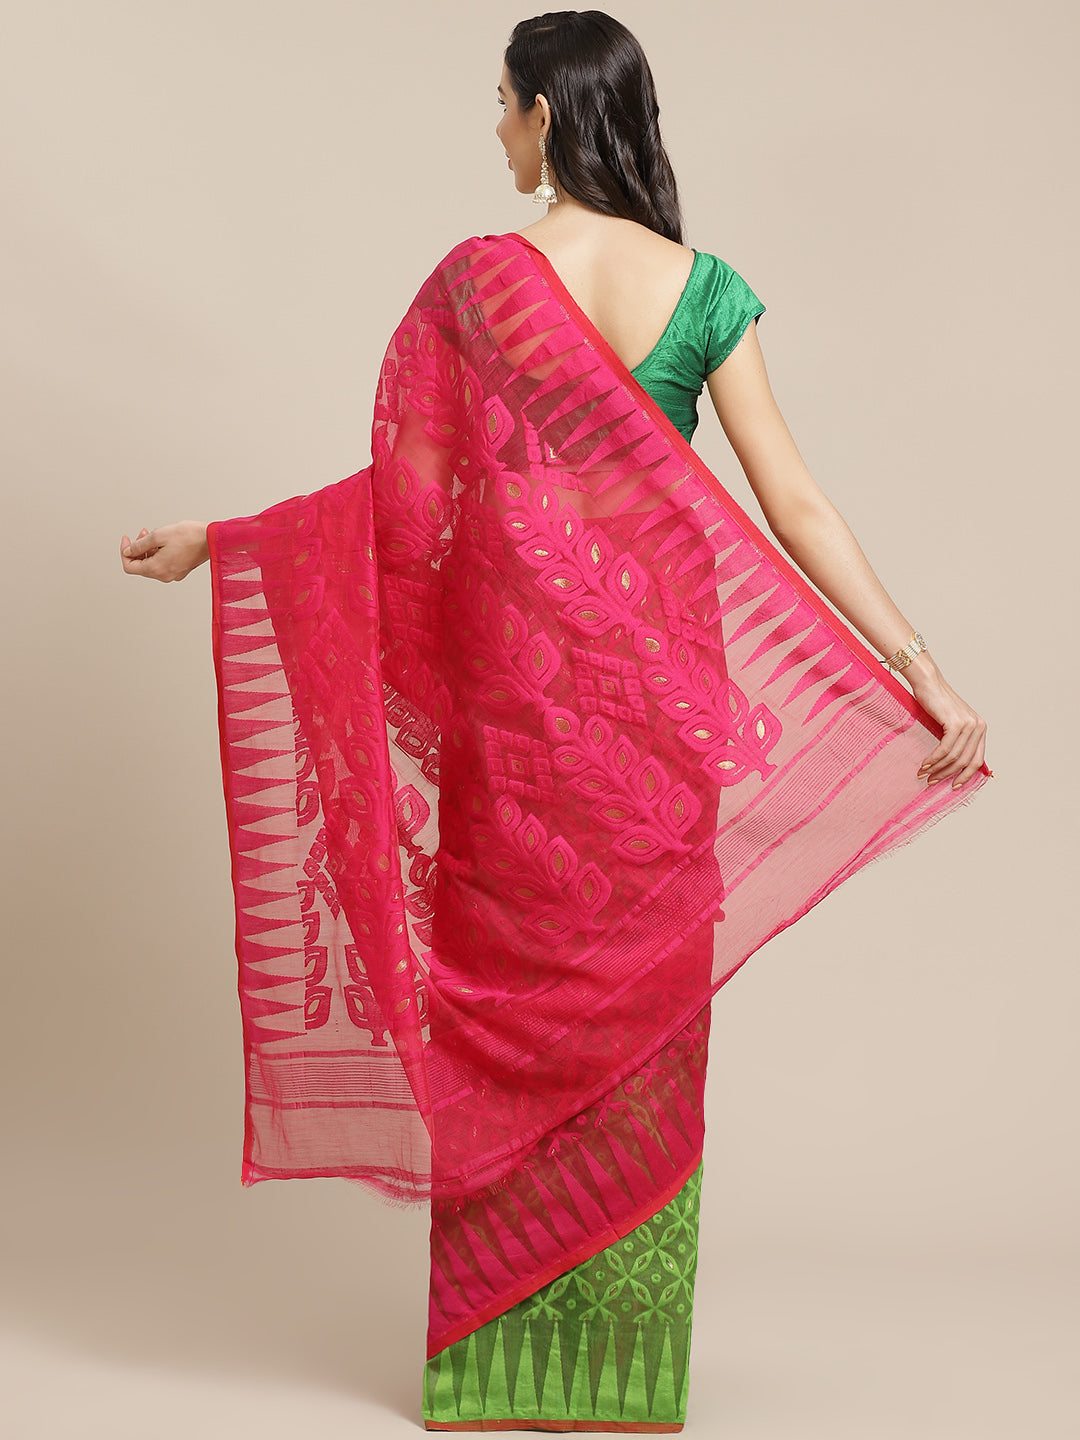 Magenta and Cream, Kalakari India Jamdani Silk Cotton Woven Design Saree without blouse CHBHSA0005-Saree-Kalakari India-CHBHSA0005-Bengal, Geographical Indication, Hand Crafted, Hand Painted, Heritage Prints, Jamdani, Natural Dyes, Red, Sarees, Silk Blended, Sustainable Fabrics, Woven, Yellow-[Linen,Ethnic,wear,Fashionista,Handloom,Handicraft,Indigo,blockprint,block,print,Cotton,Chanderi,Blue, latest,classy,party,bollywood,trendy,summer,style,traditional,formal,elegant,unique,style,hand,block,pr